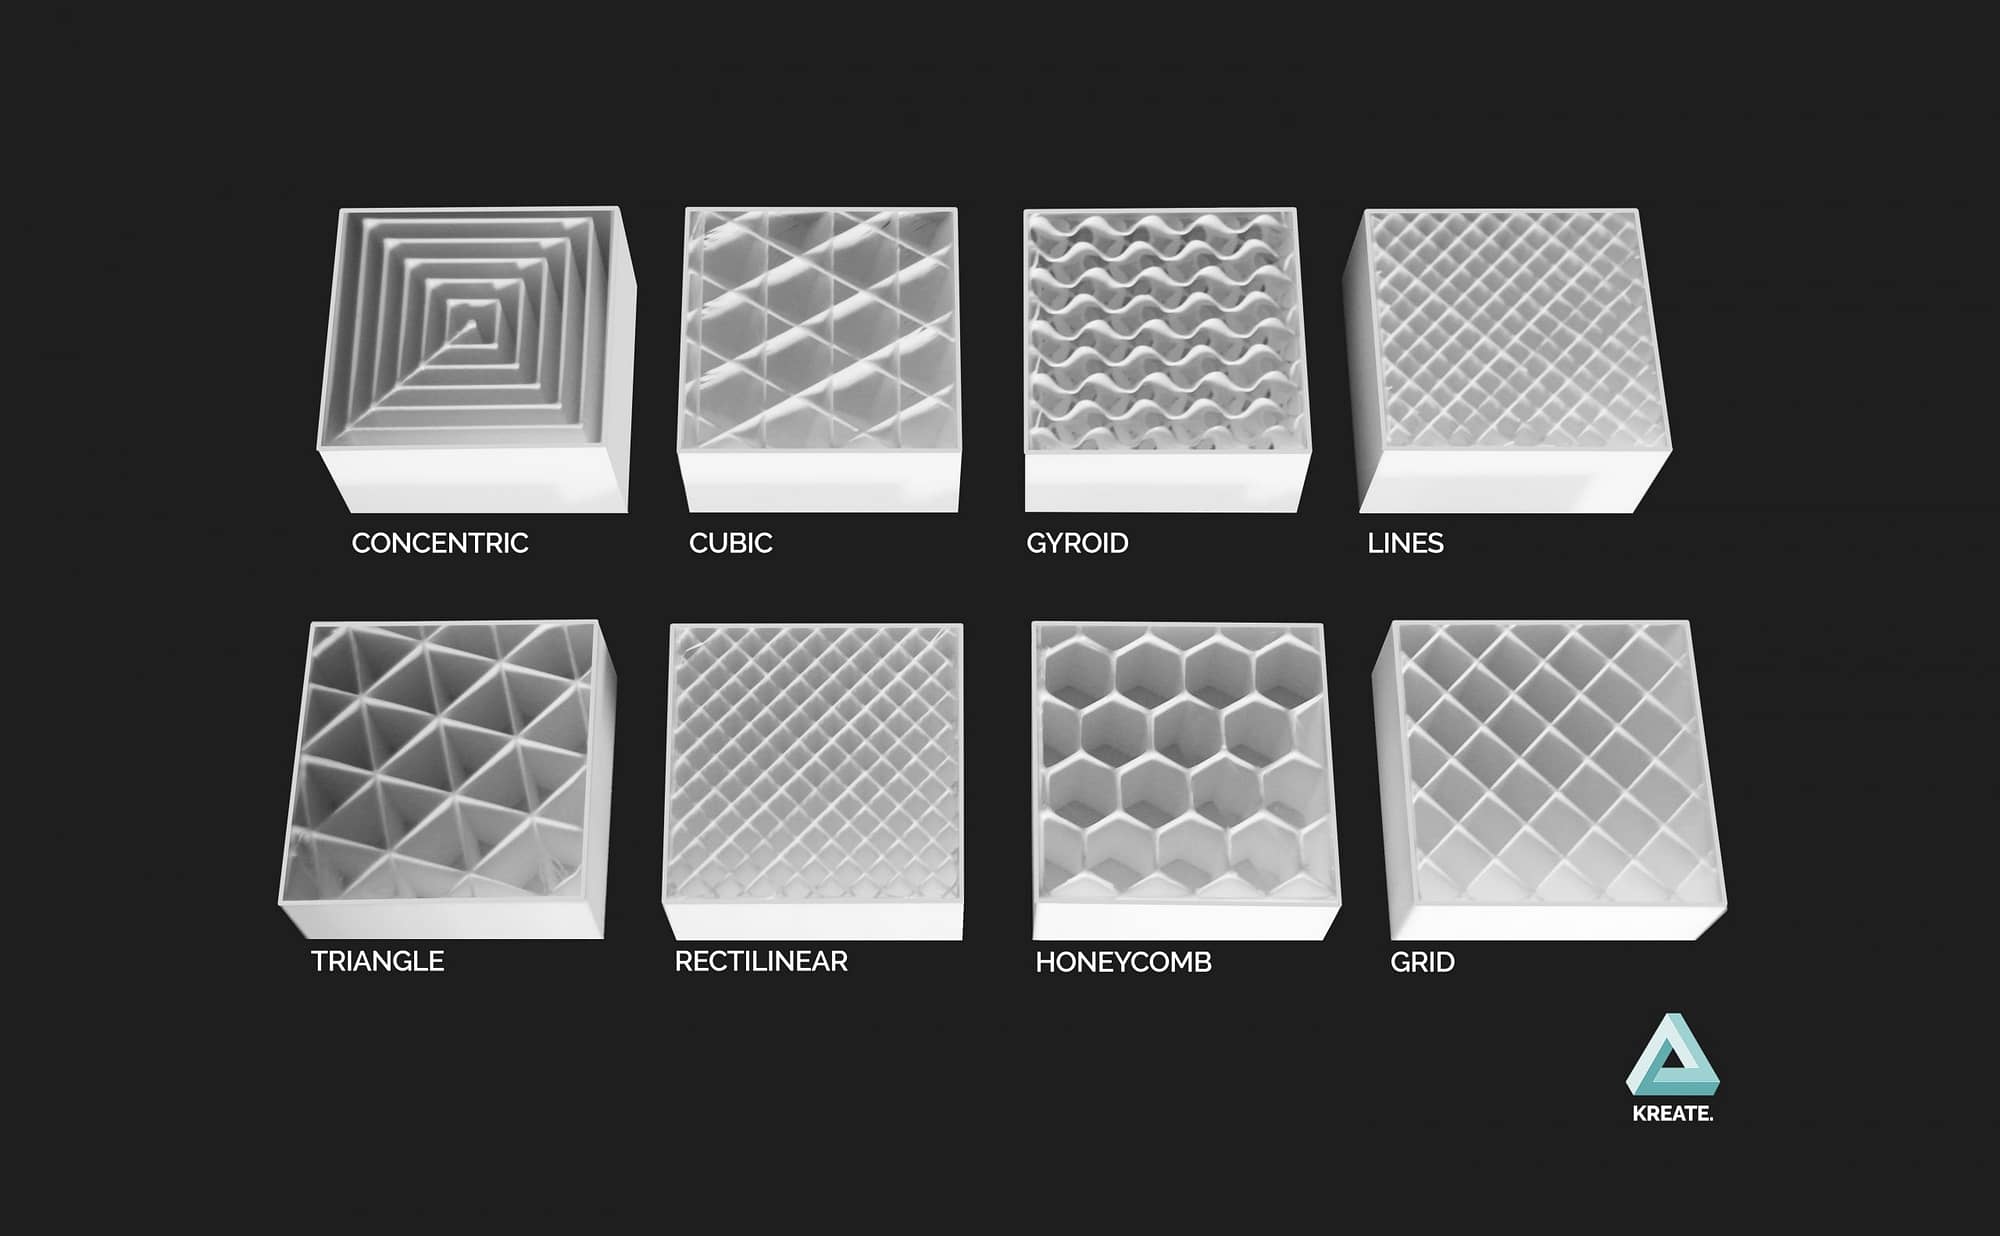 The different types of infill patterns for 3D printing